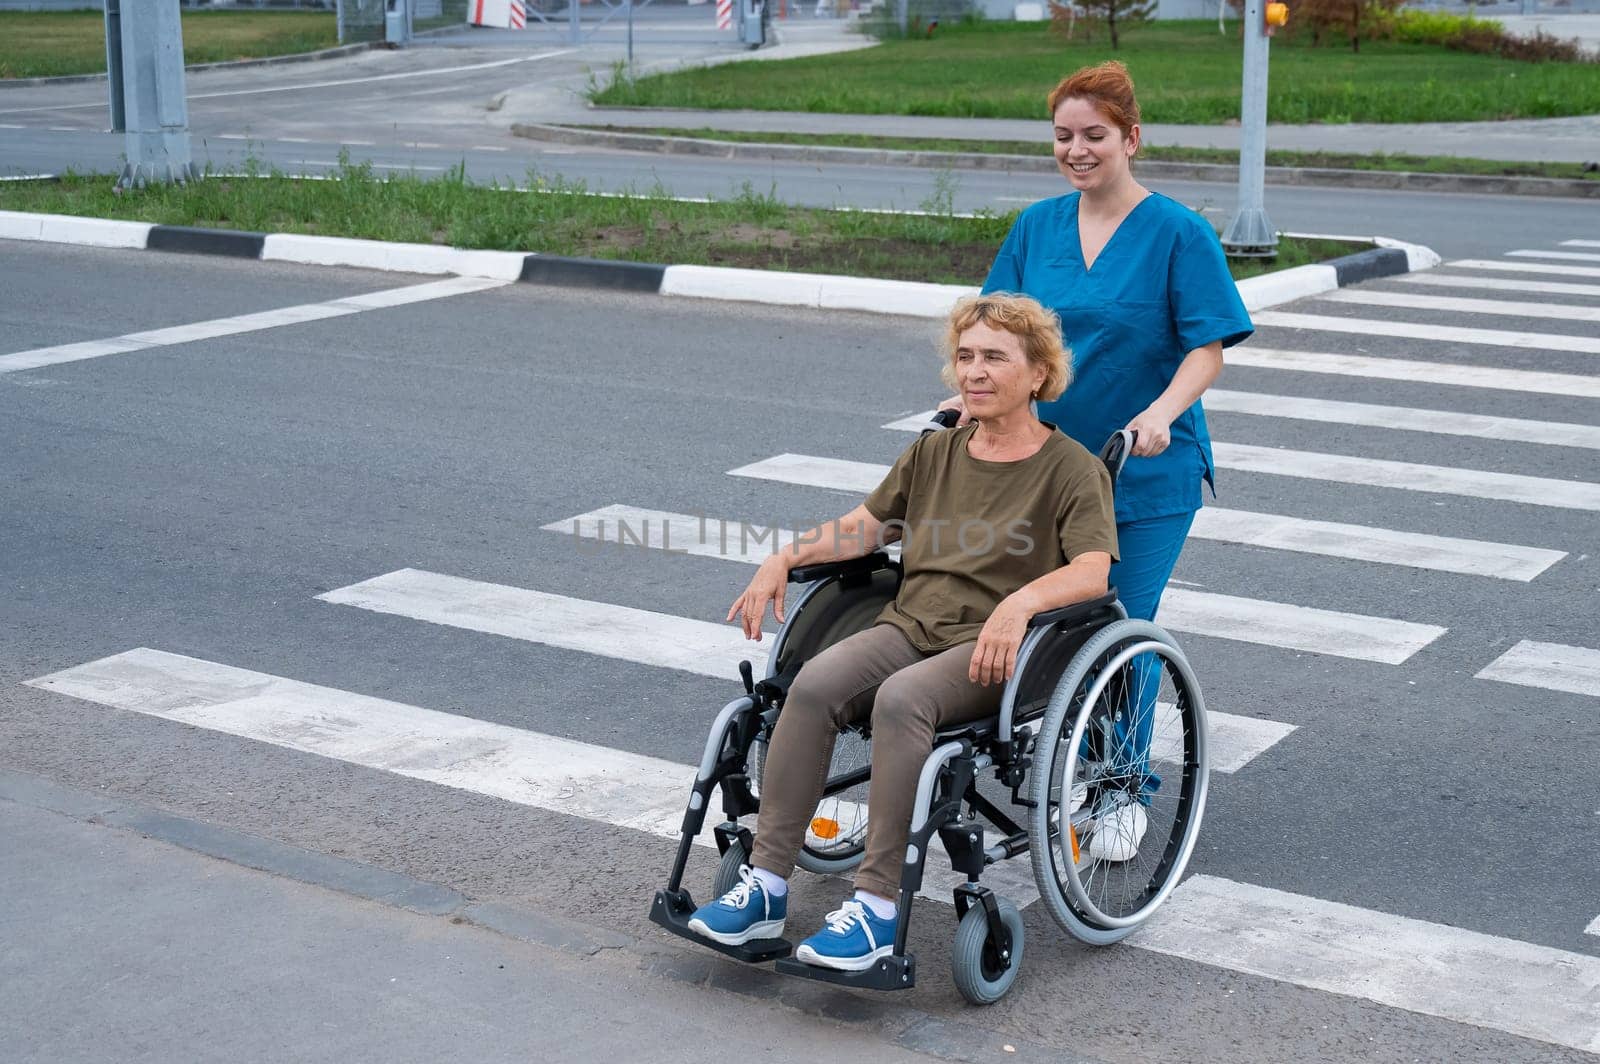 Red-haired nurse pushing an elderly woman in a wheelchair across the road. by mrwed54